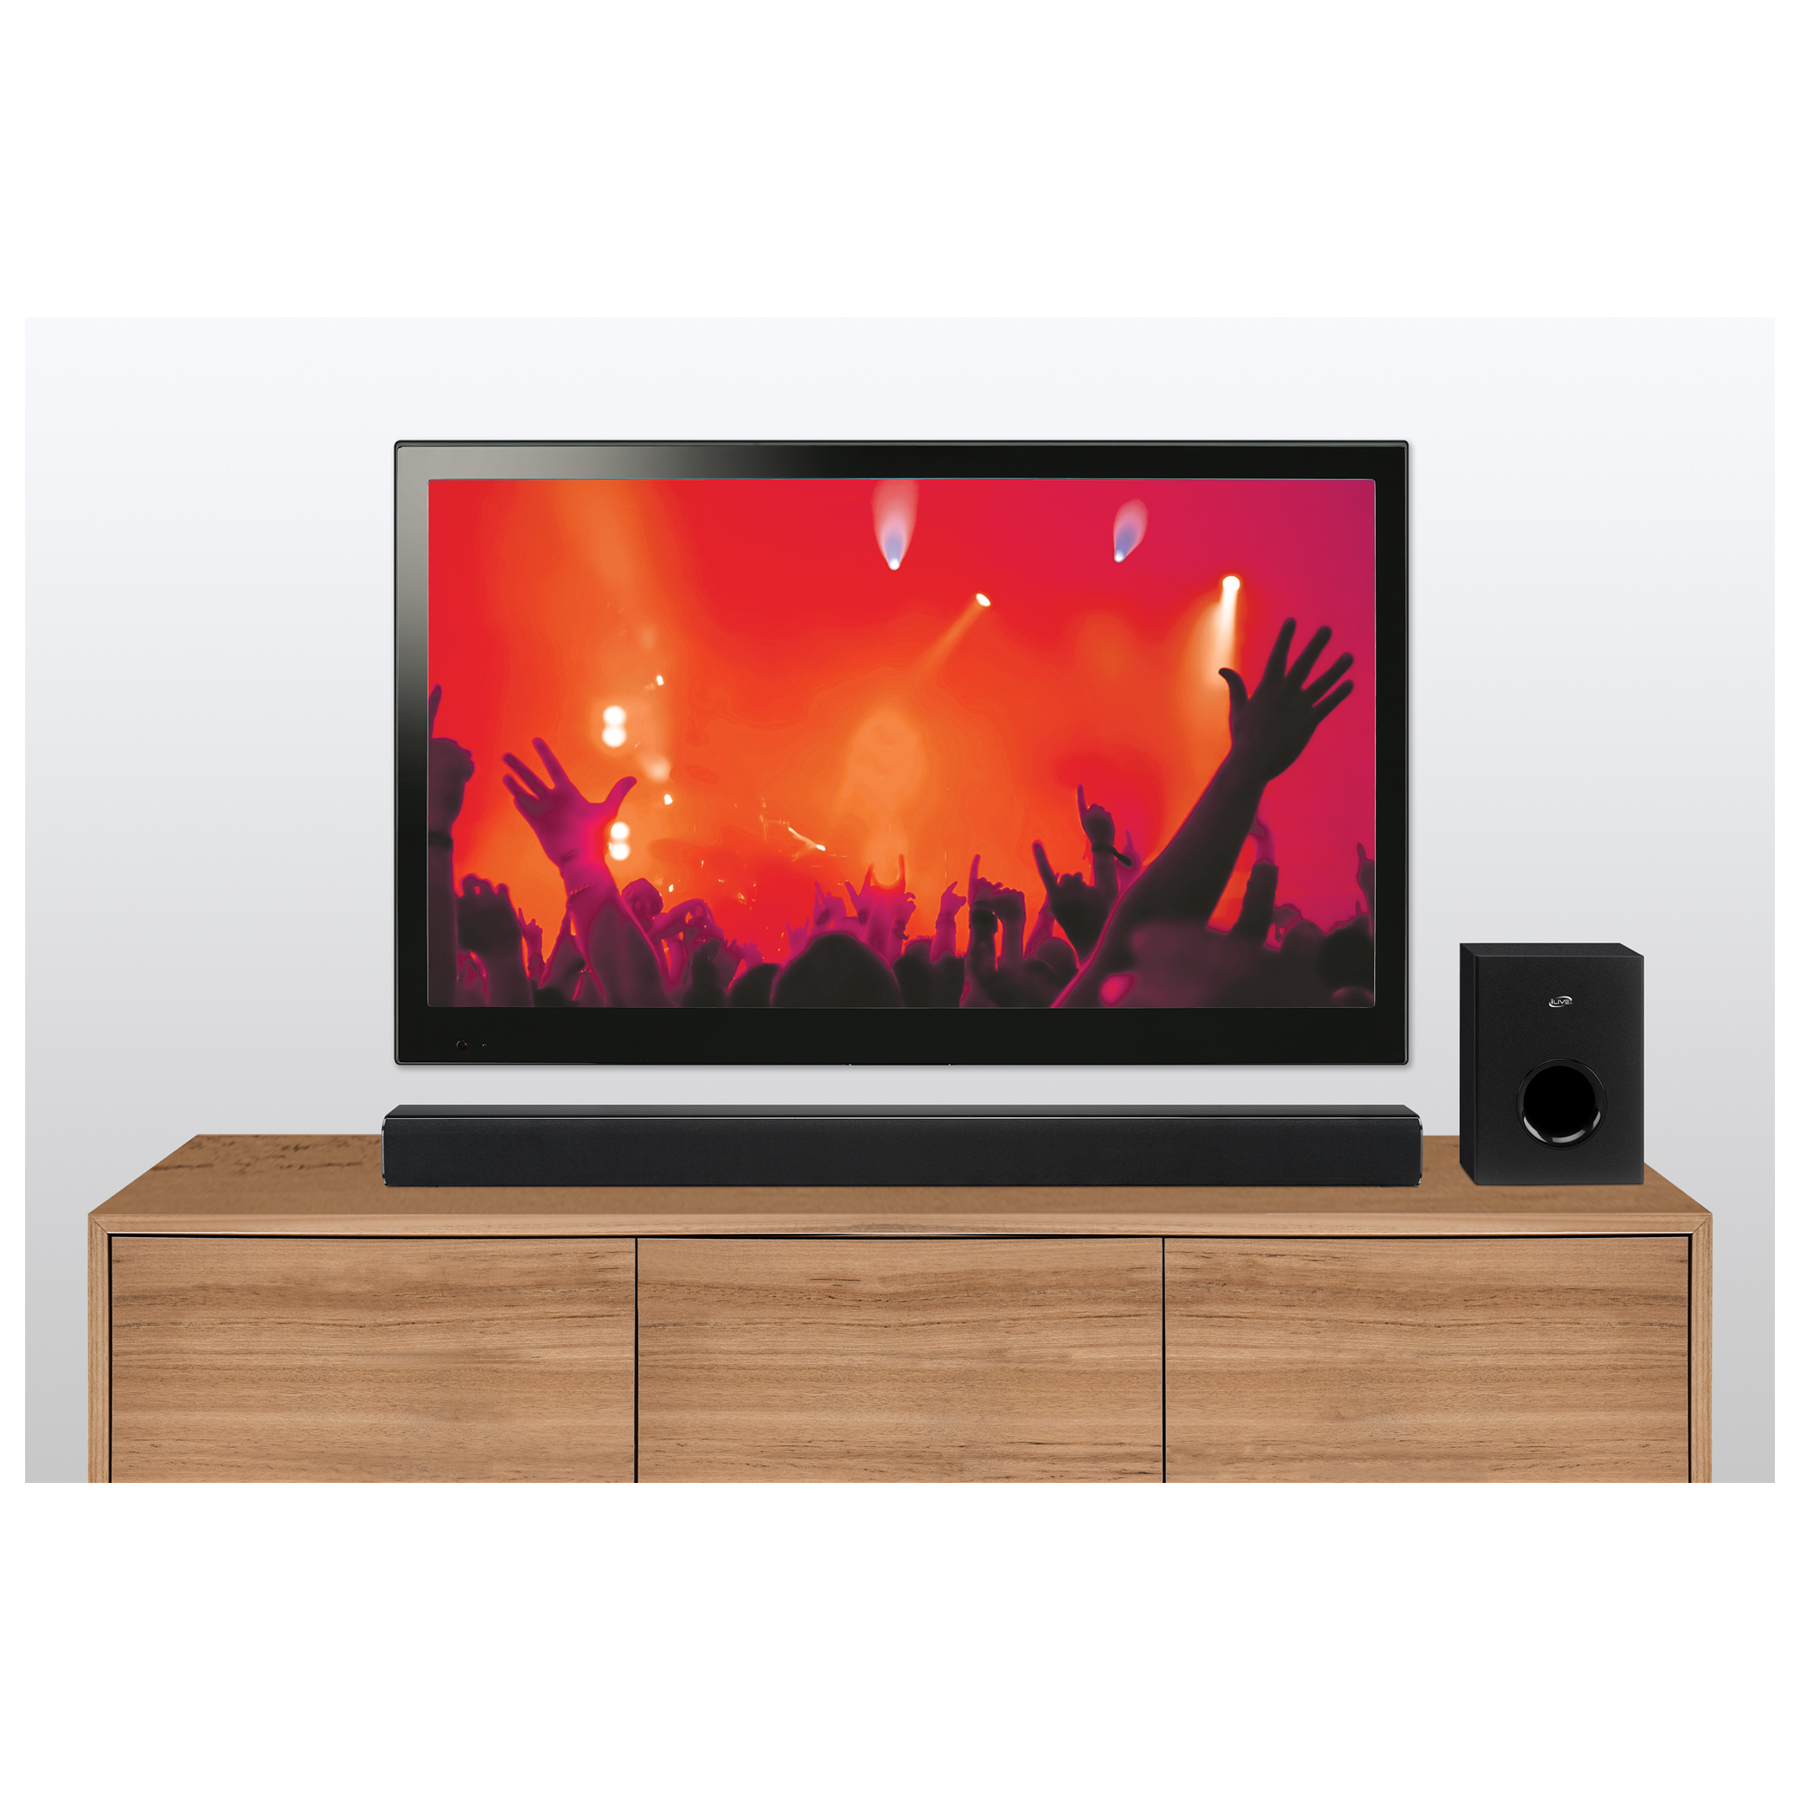 iLive 2.1 37" HD Soundbar and Wireless Subwoofer, ITBSW399B - image 5 of 6